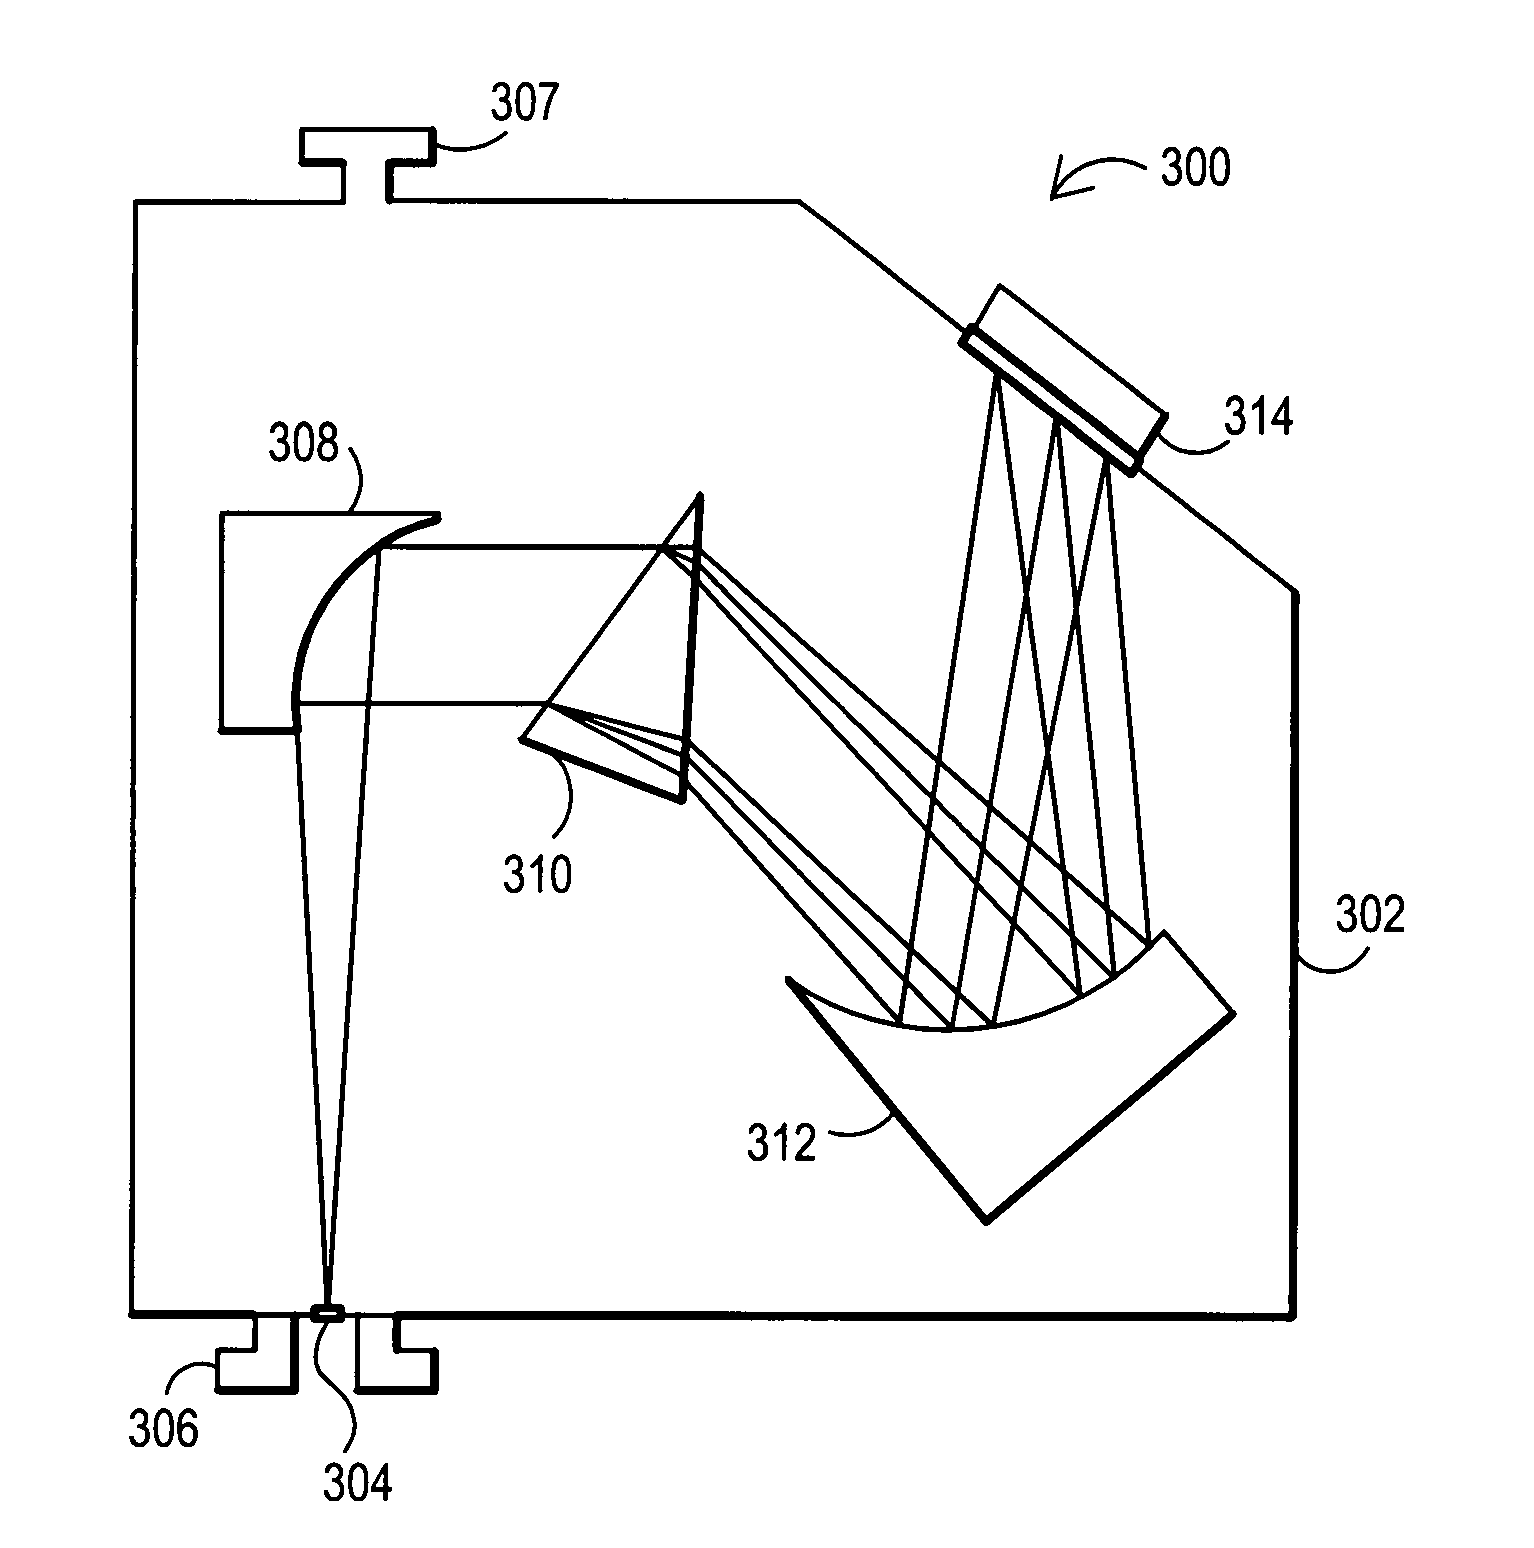 Spectrometer with collimated input light